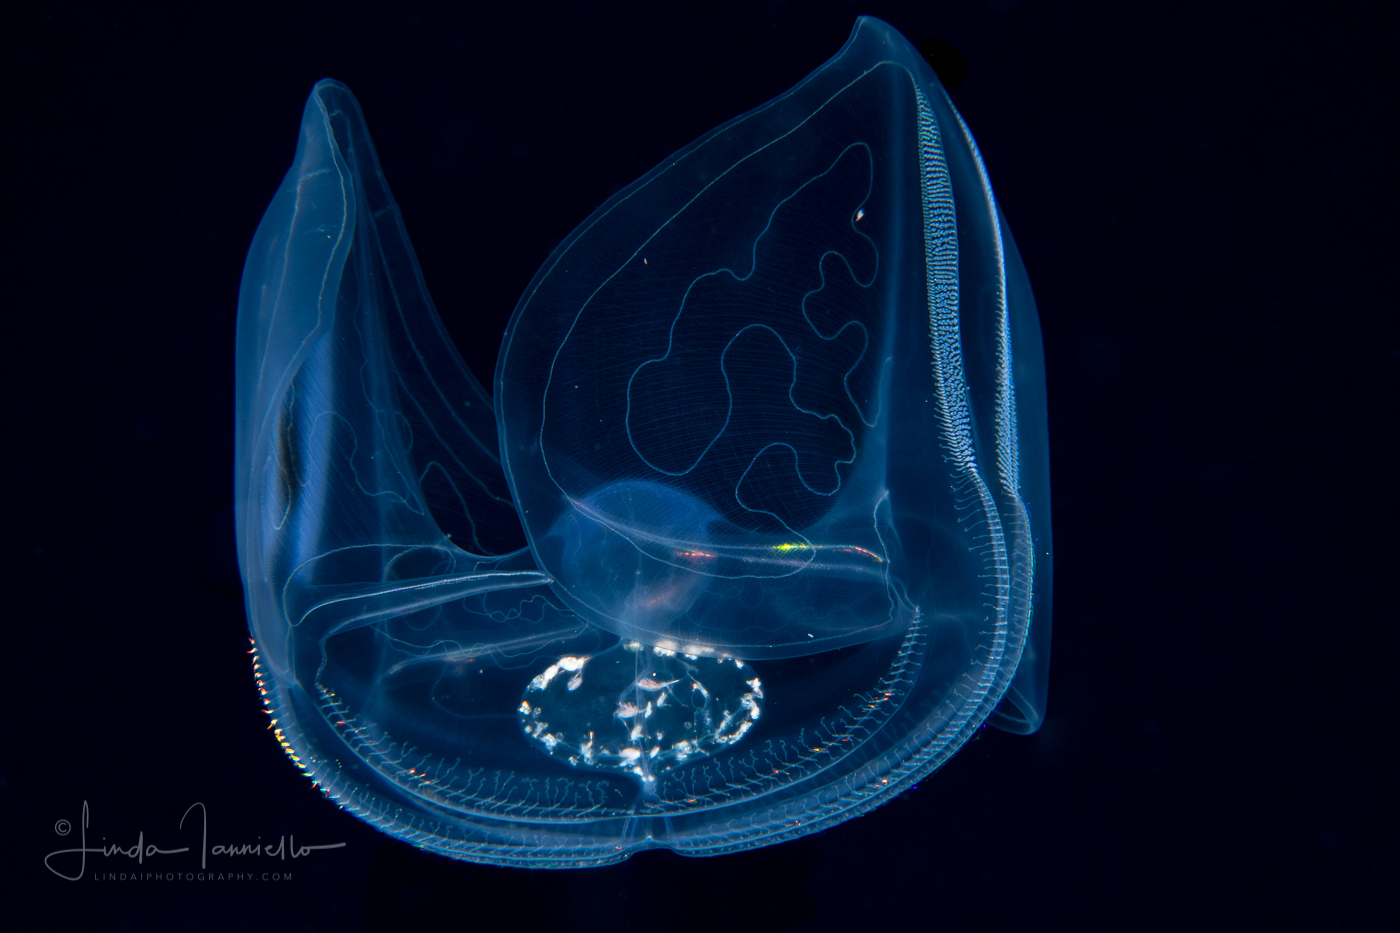 Ctenophore - Winged Comb Jelly - Ocyropsis maculata immaculata